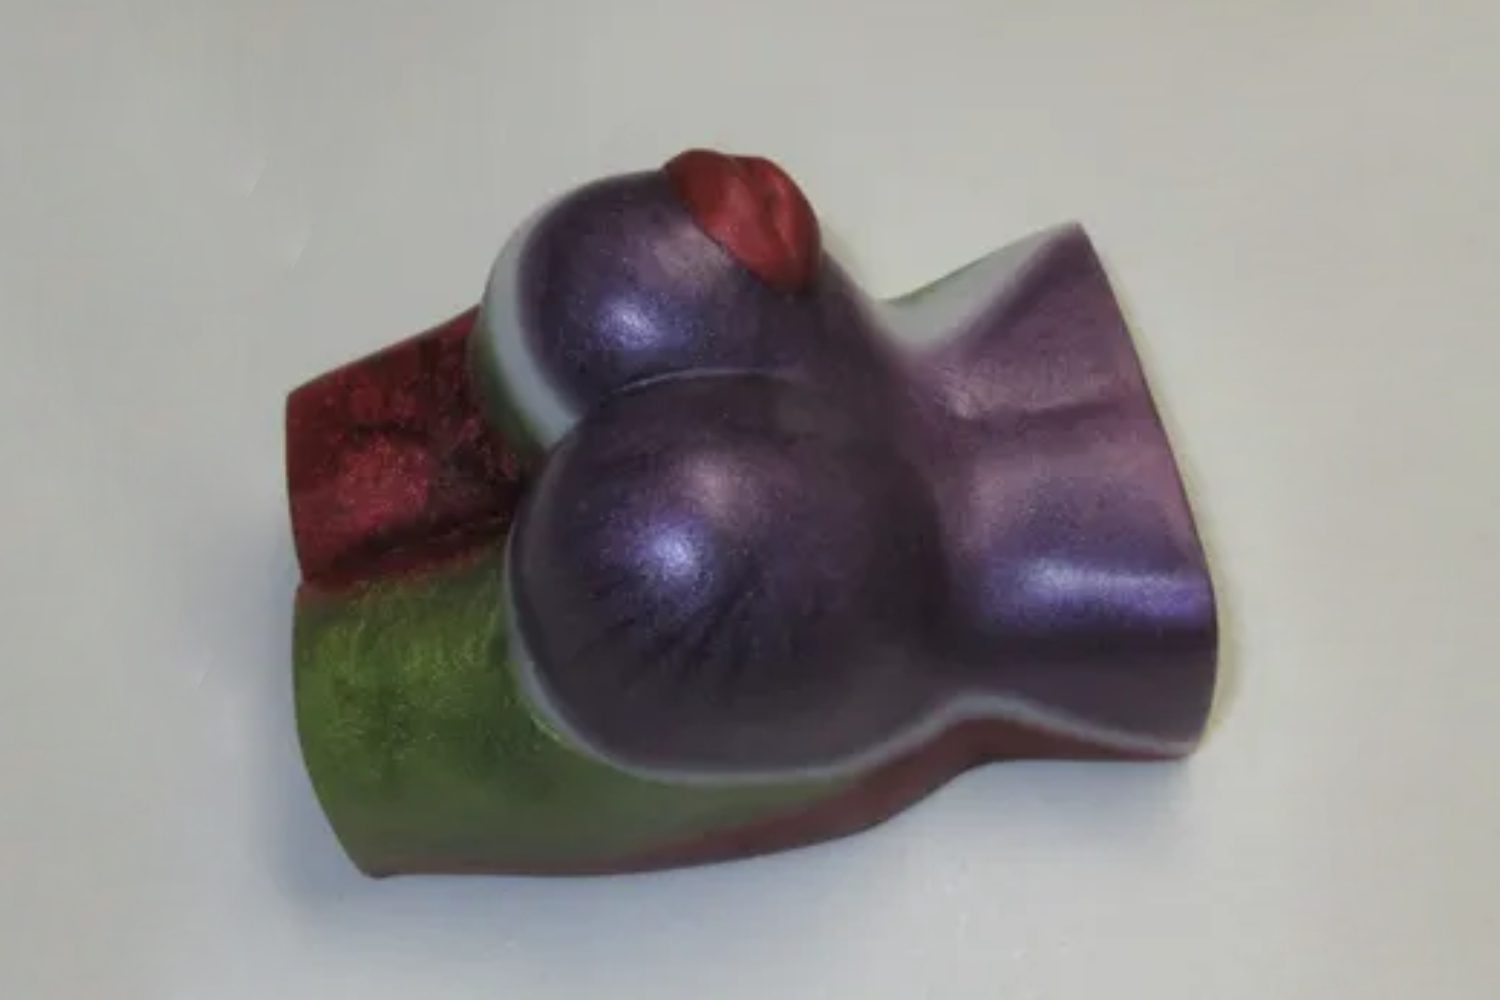 A purple and green soap shaped like a woman 's breasts.